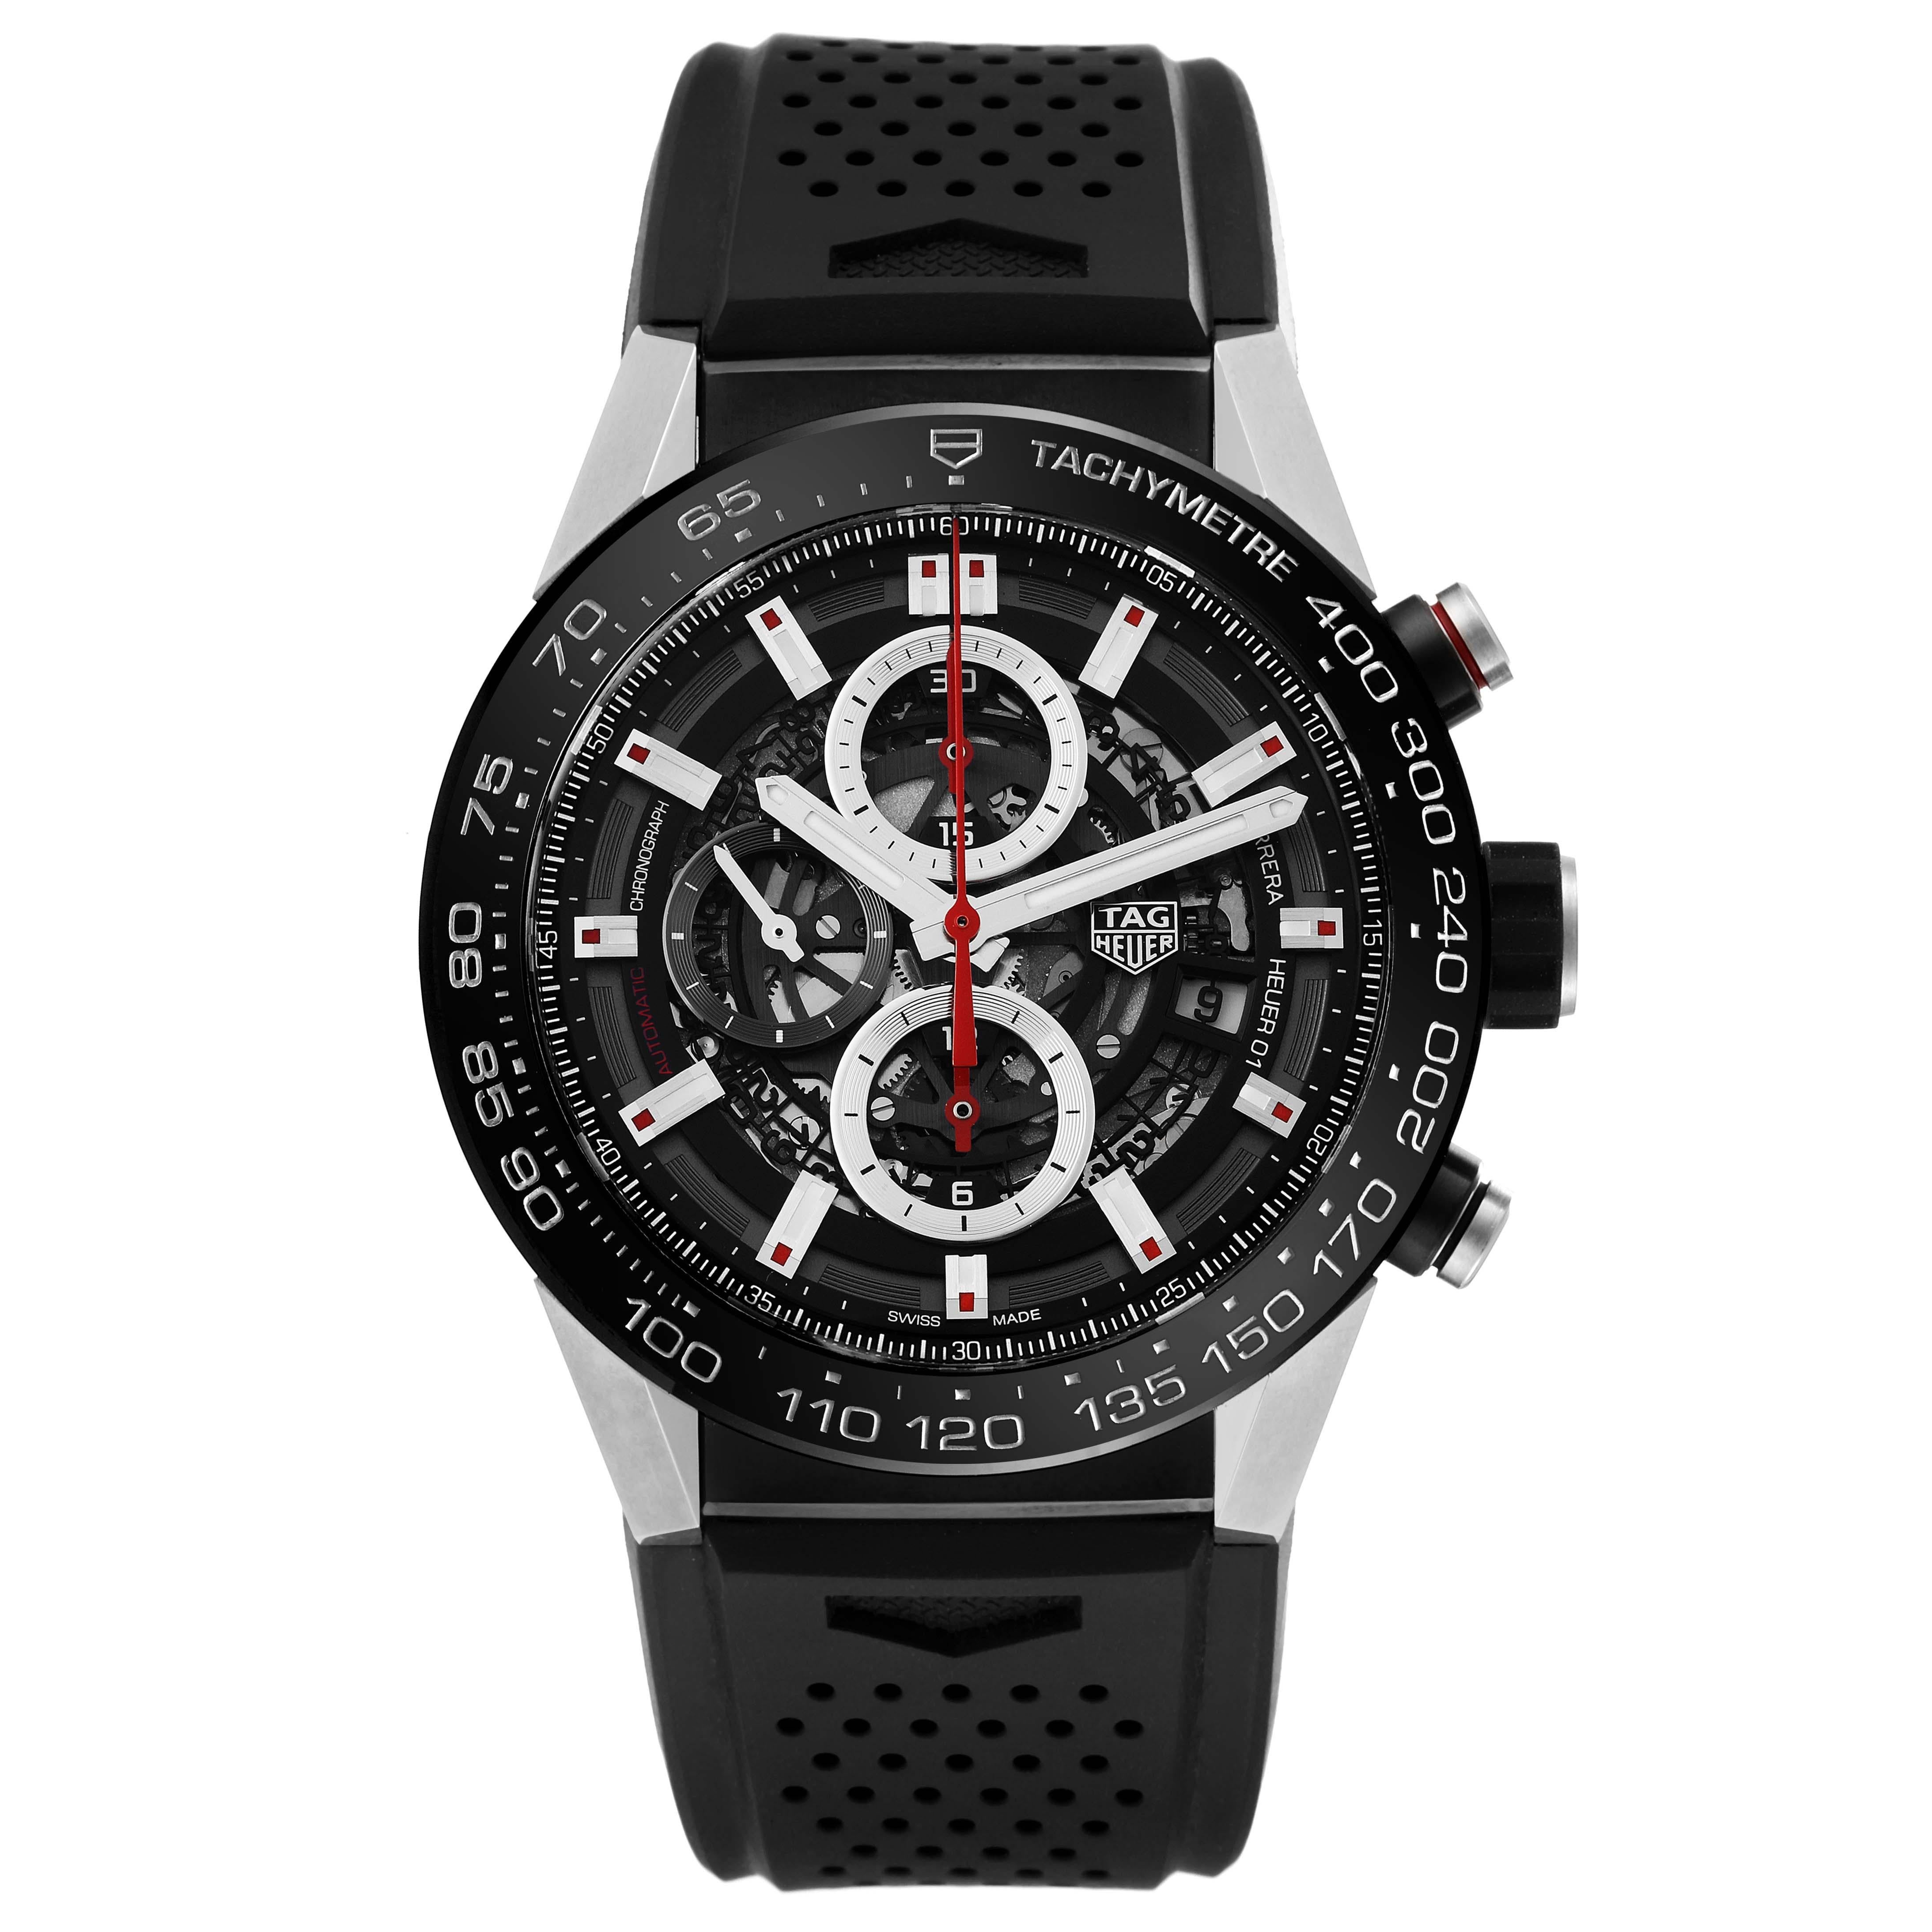 TAG Heuer Carrera Calibre Heuer 01 Skeleton Steel Mens Watch CAR2A1Z Box Card. Automatic self-winding movement. Stainless steel case 45 mm. Case thickness: 16.5 mm. Exhibition transparent sapphire crystal caseback. Brushed black titanium carbide